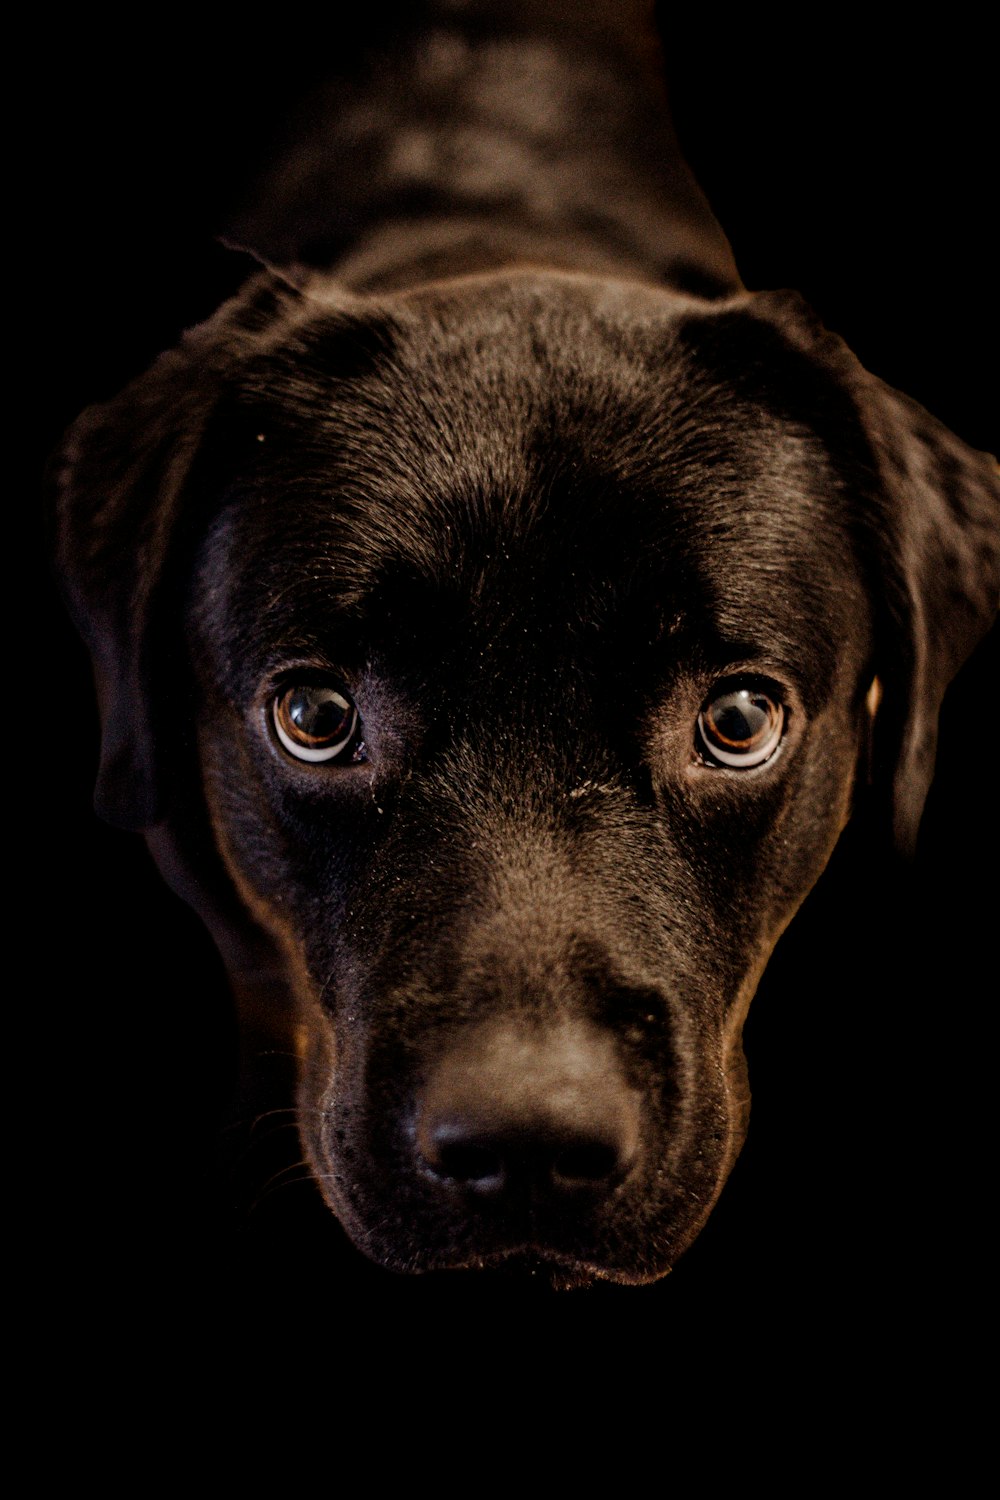 a close up of a dog's face on a black background